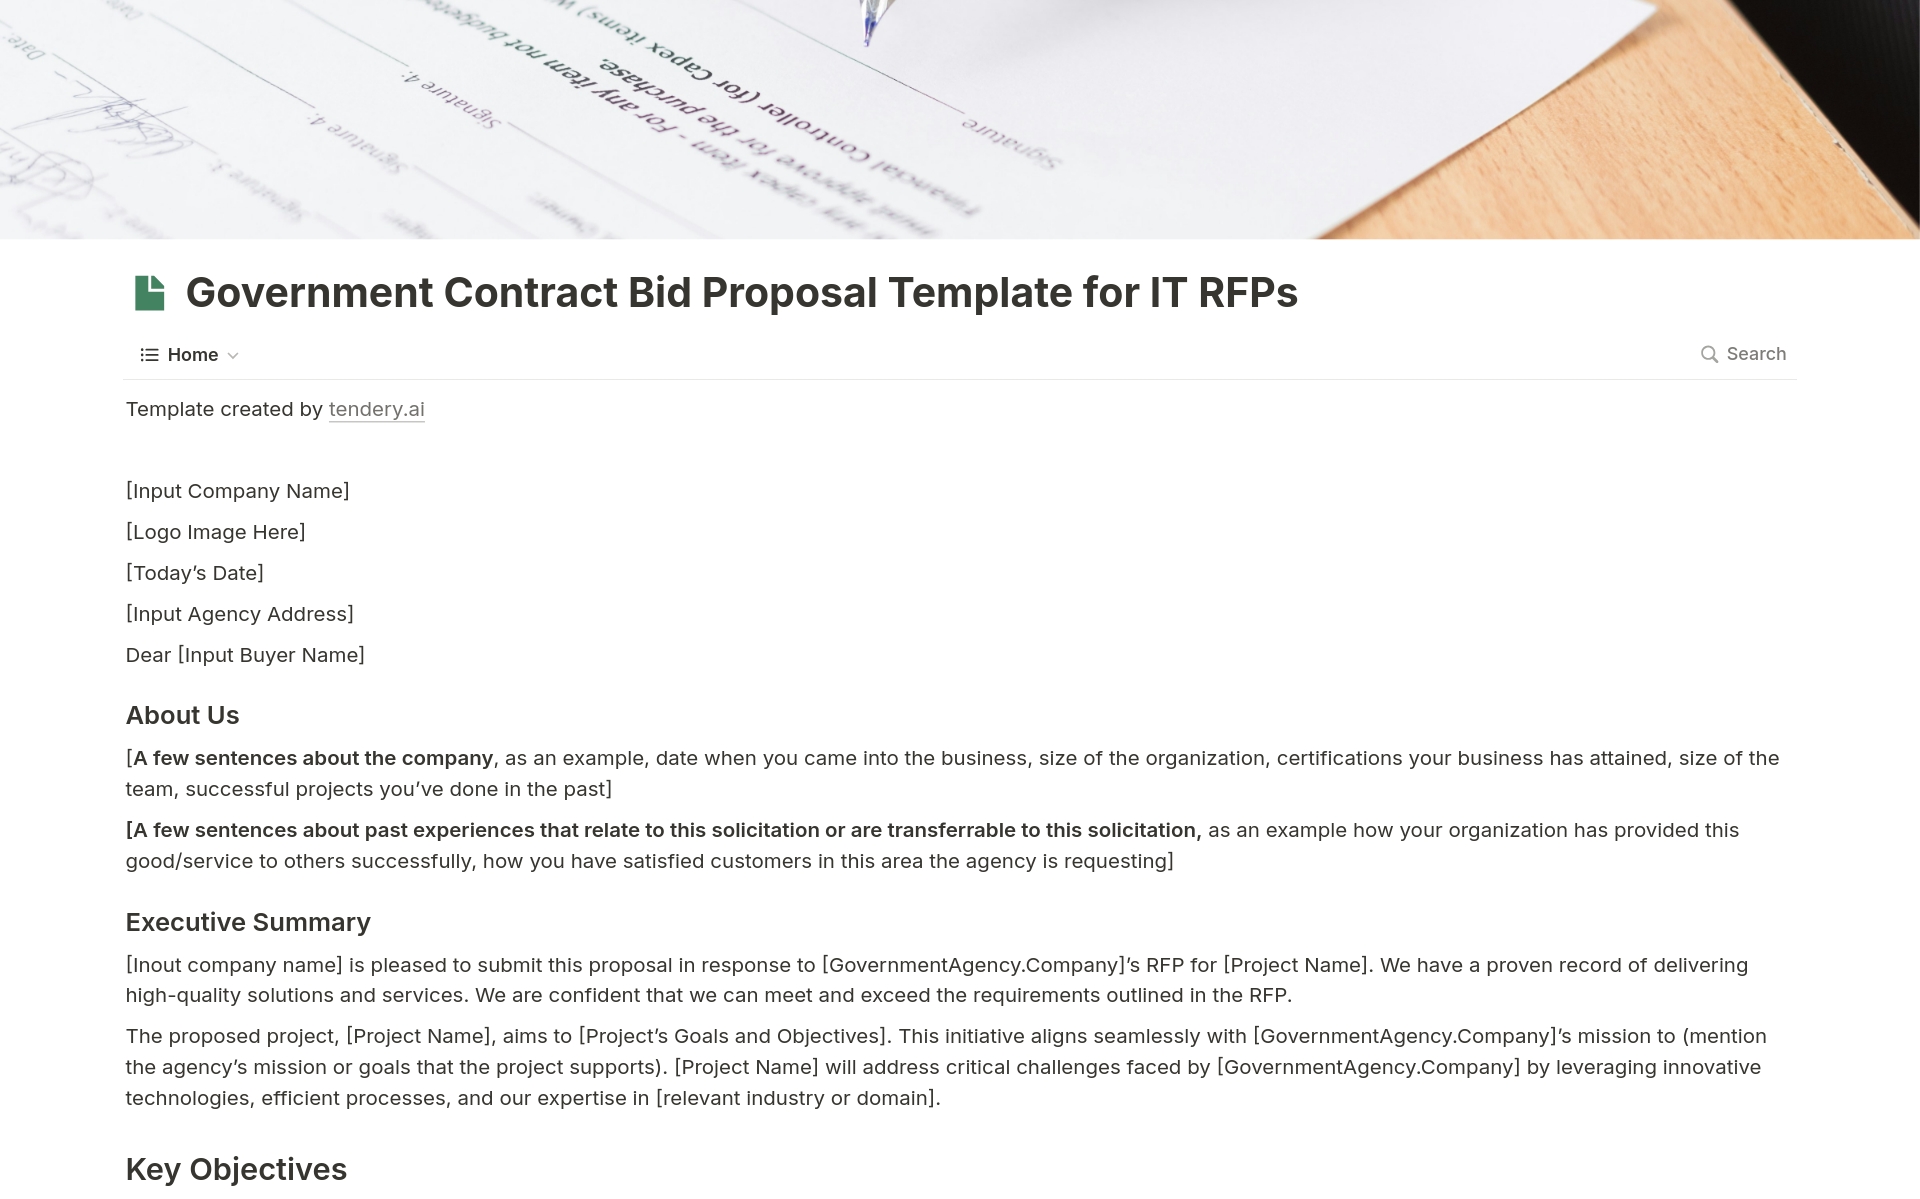 Bid Proposal Template for IT RFPs (request for proposal). Use this template to win more government contracts.
Actively used for European tenders.